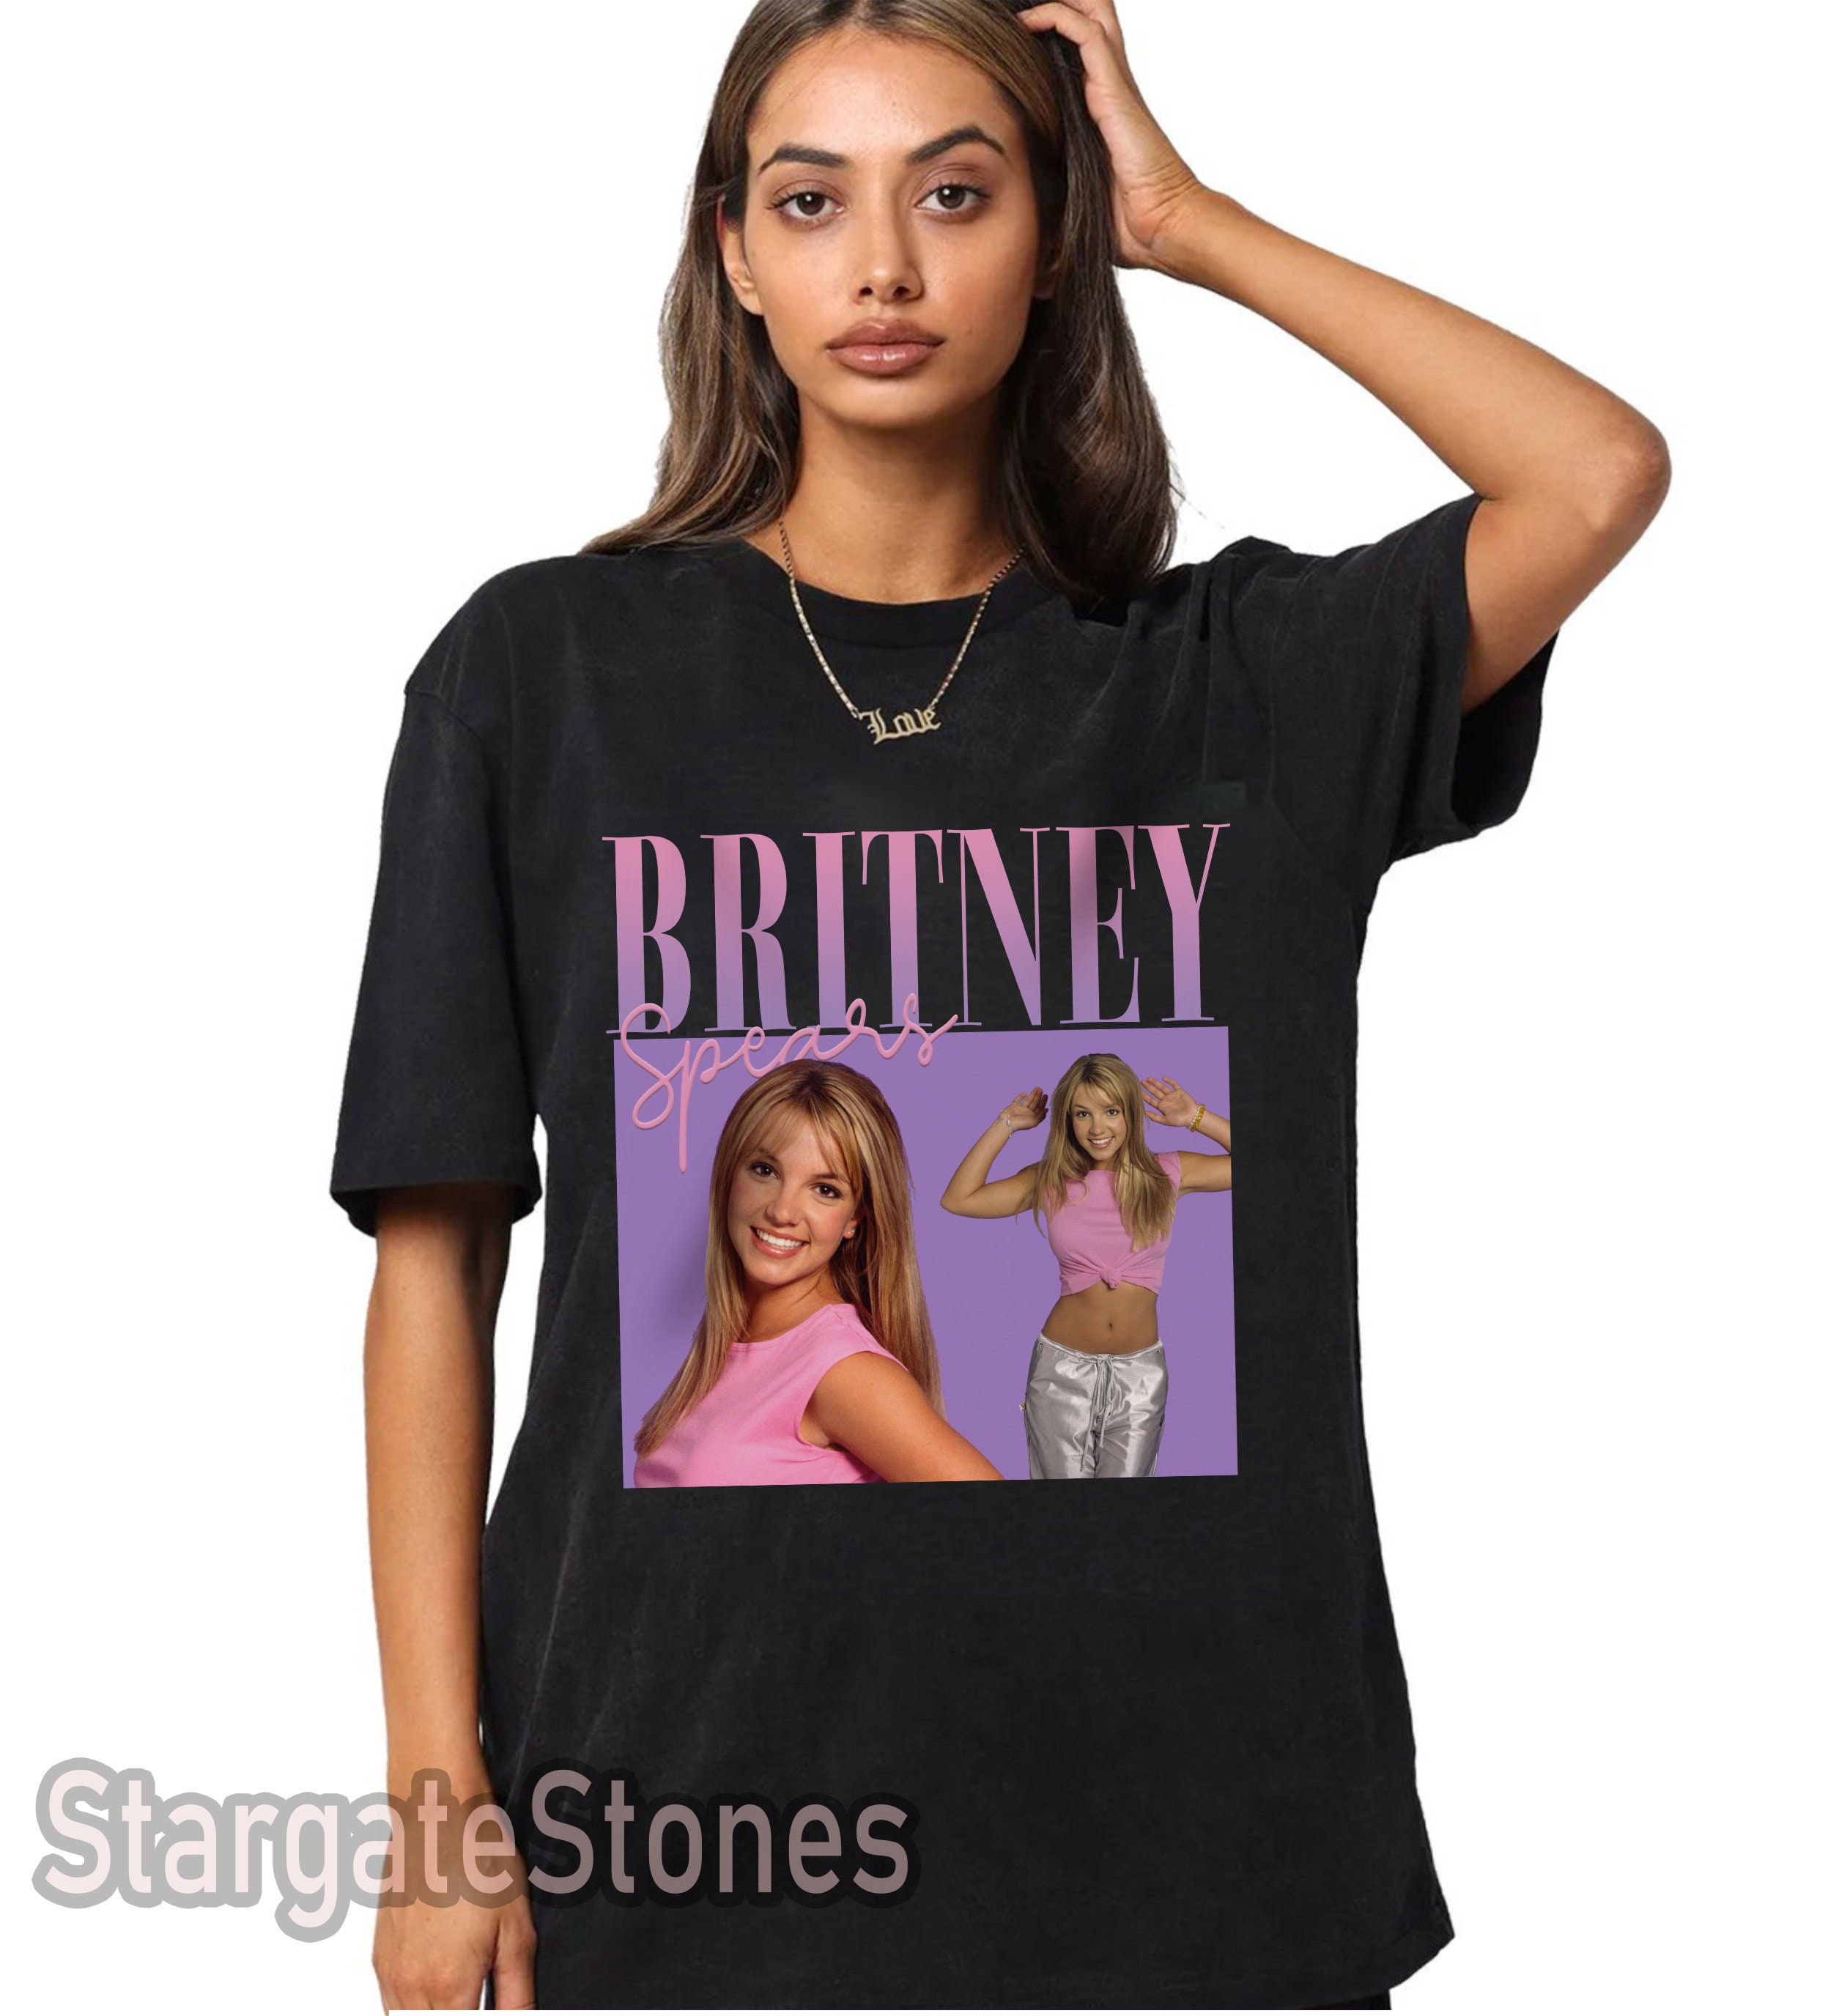 Print Bar Free Britney Hashtag FreeBritney Fitted Soft Unisex Tank Top Shirt 